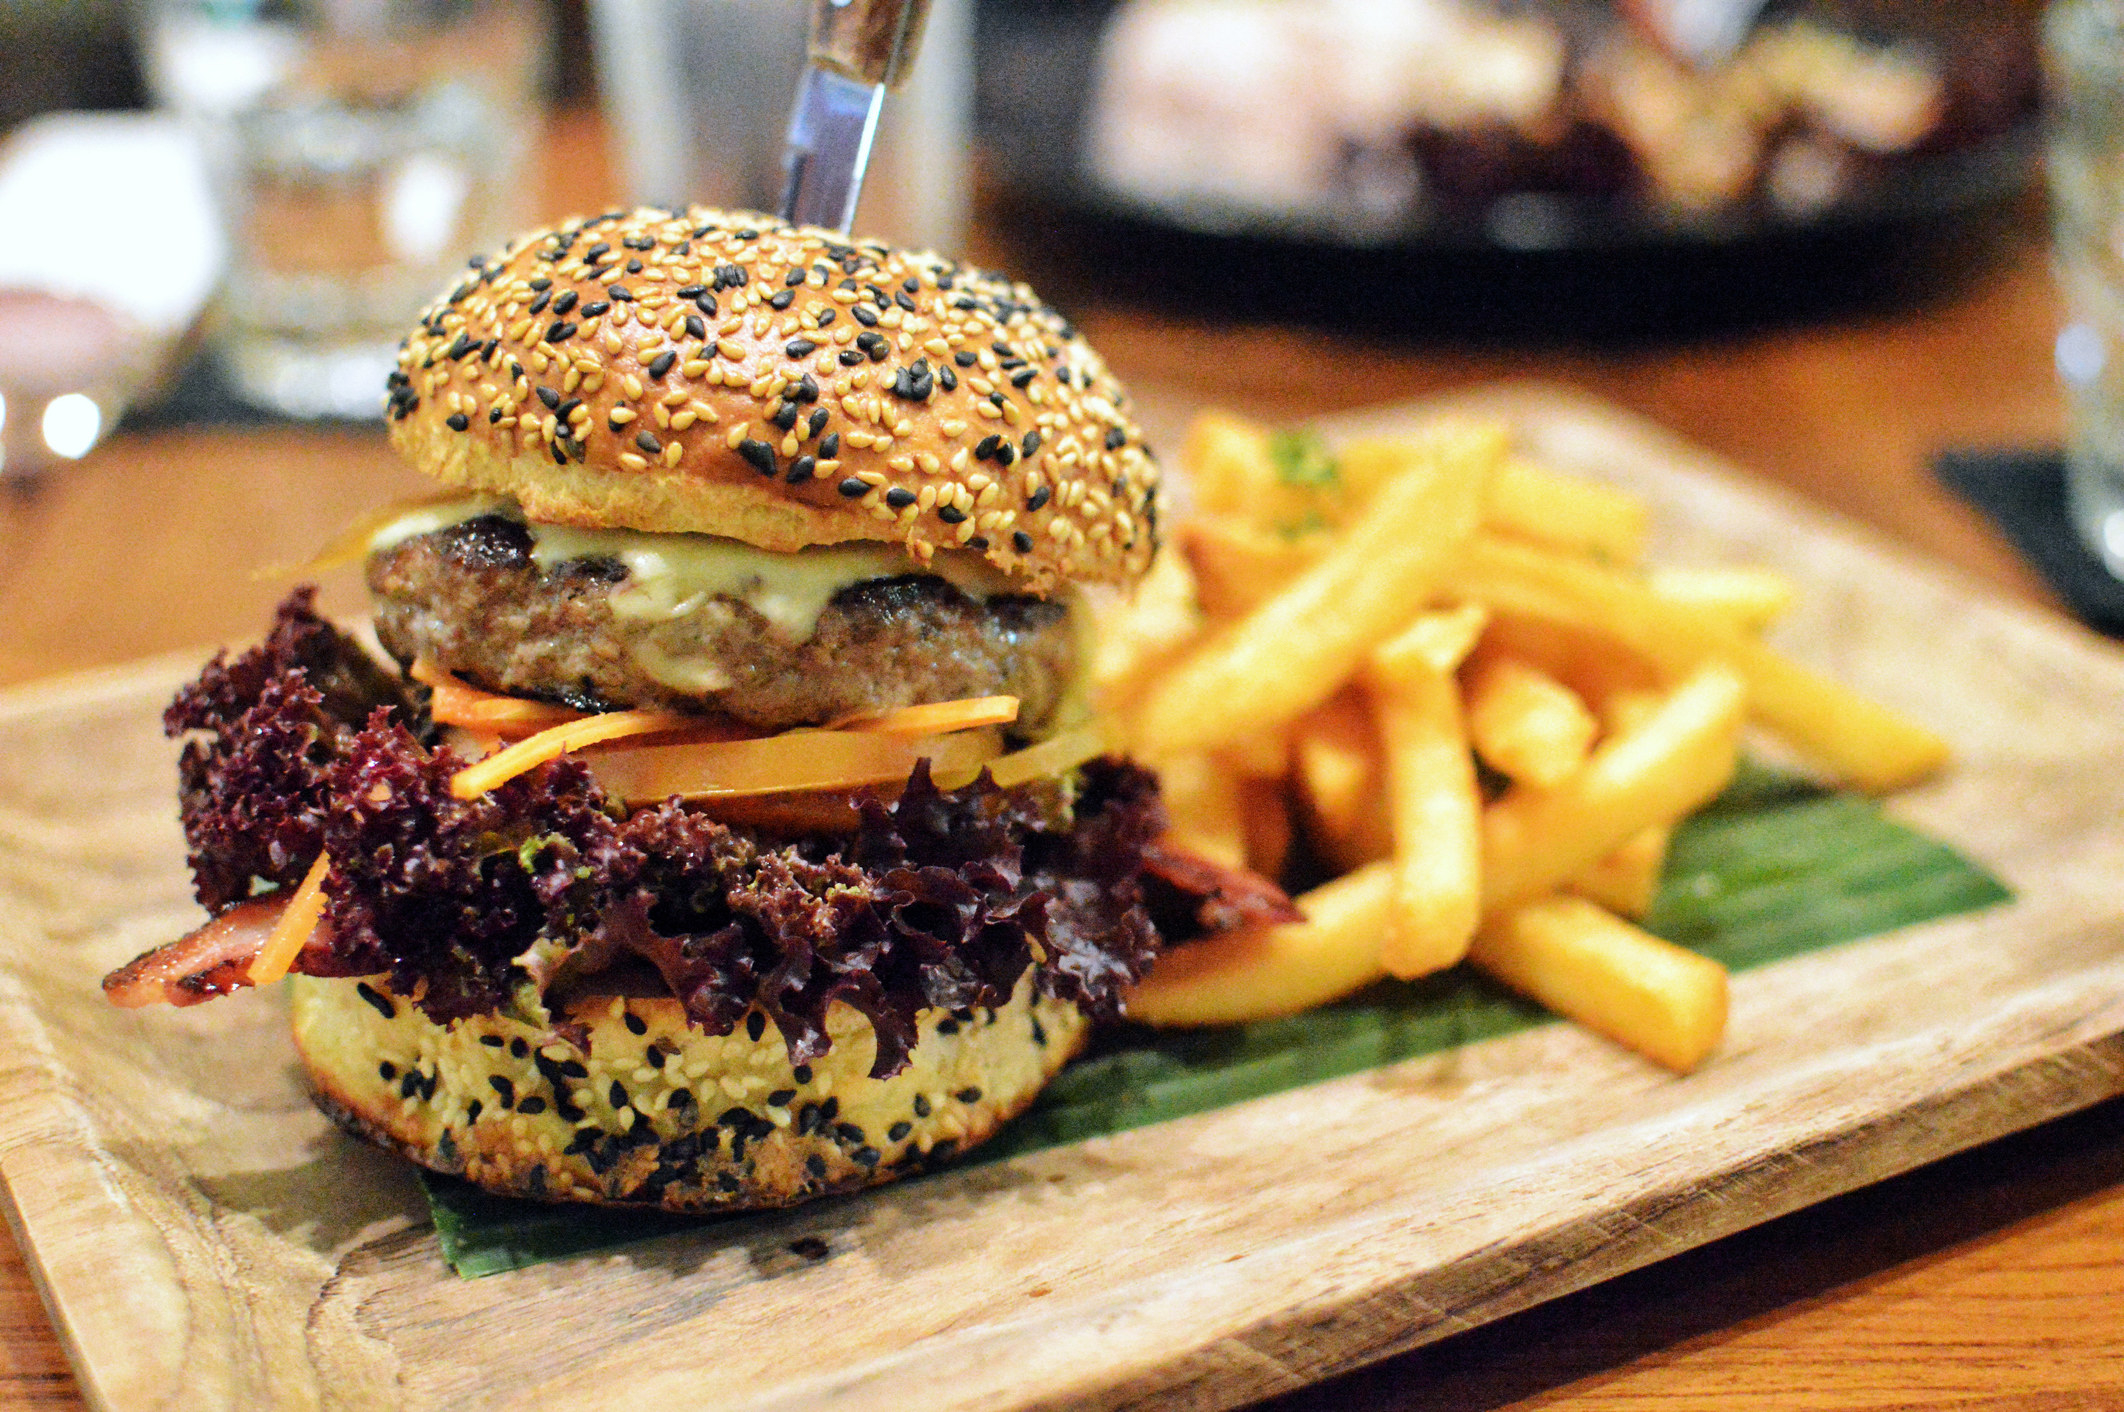 A delicious hamburger and fries are arranged on a wooden board.